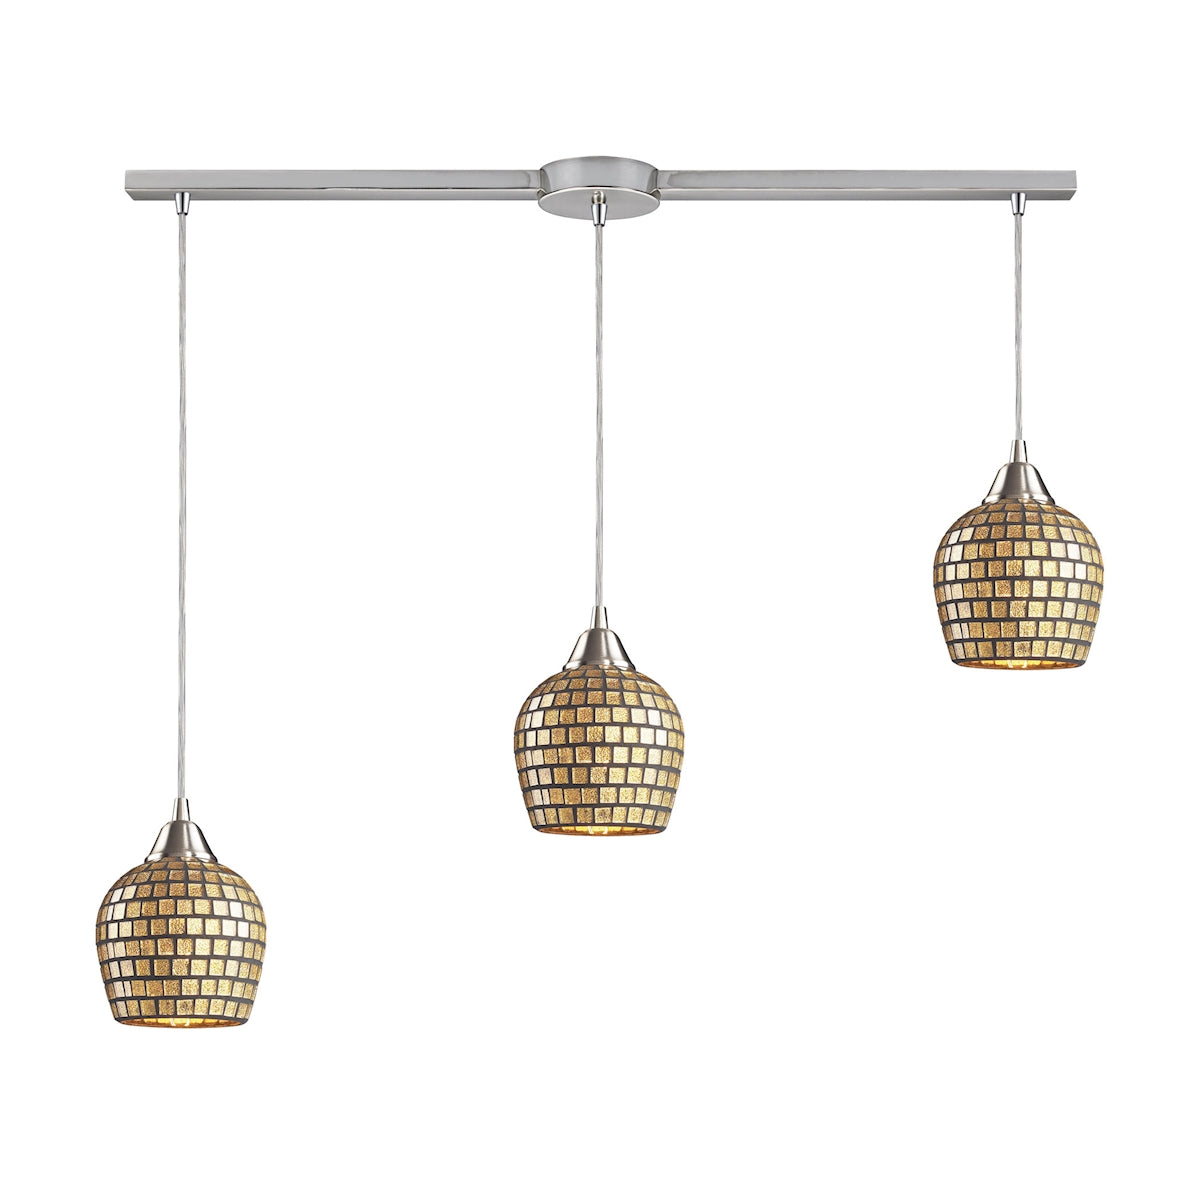 ELK Lighting 528-3L-GLD Fusion 3-Light Linear Pendant Fixture in Satin Nickel with Gold Leaf Mosaic Glass